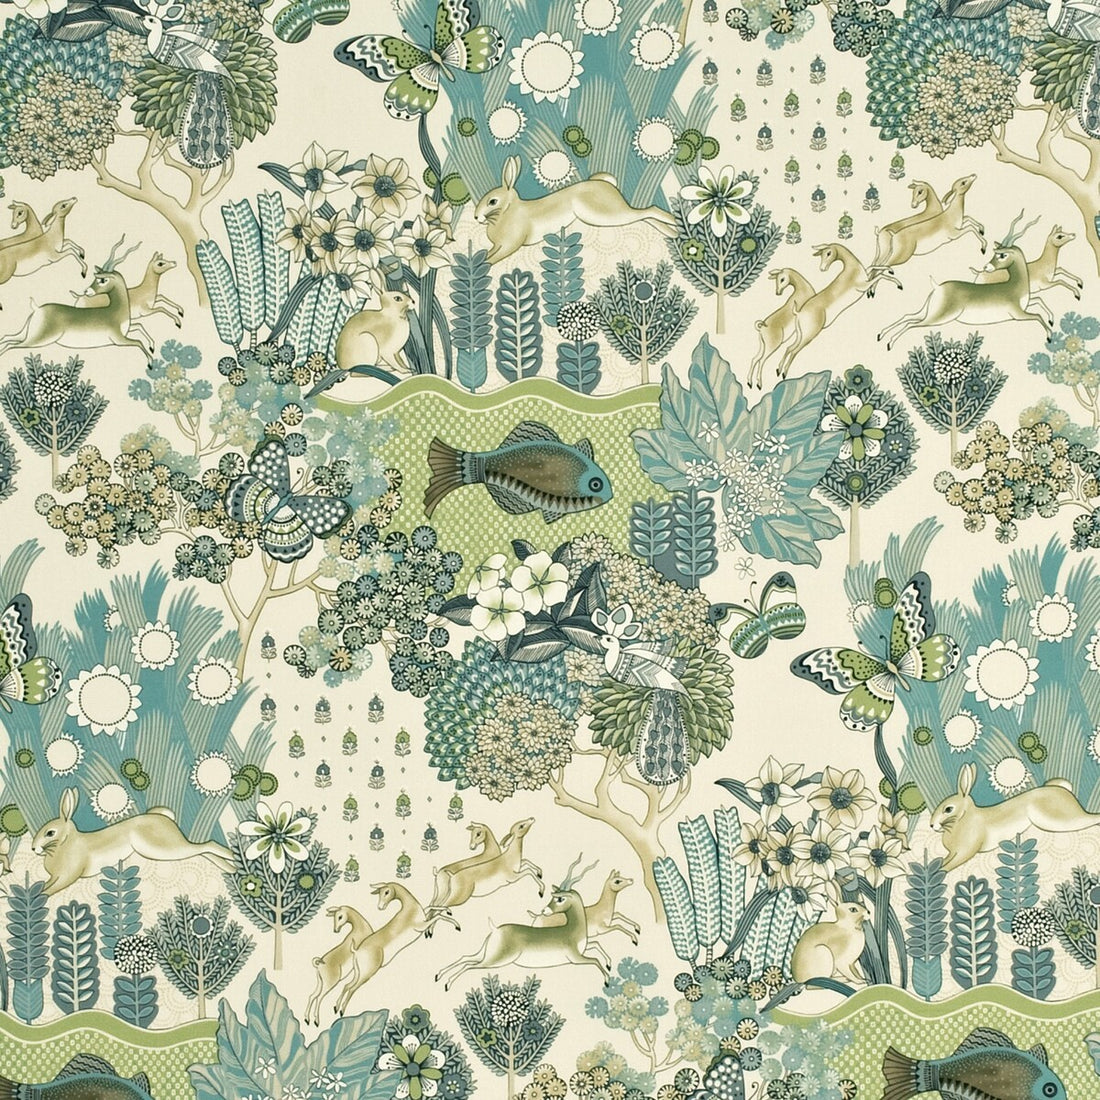 Glendale fabric in teal/leaf color - pattern FD259.R38.0 - by Mulberry in the Country Weekend collection